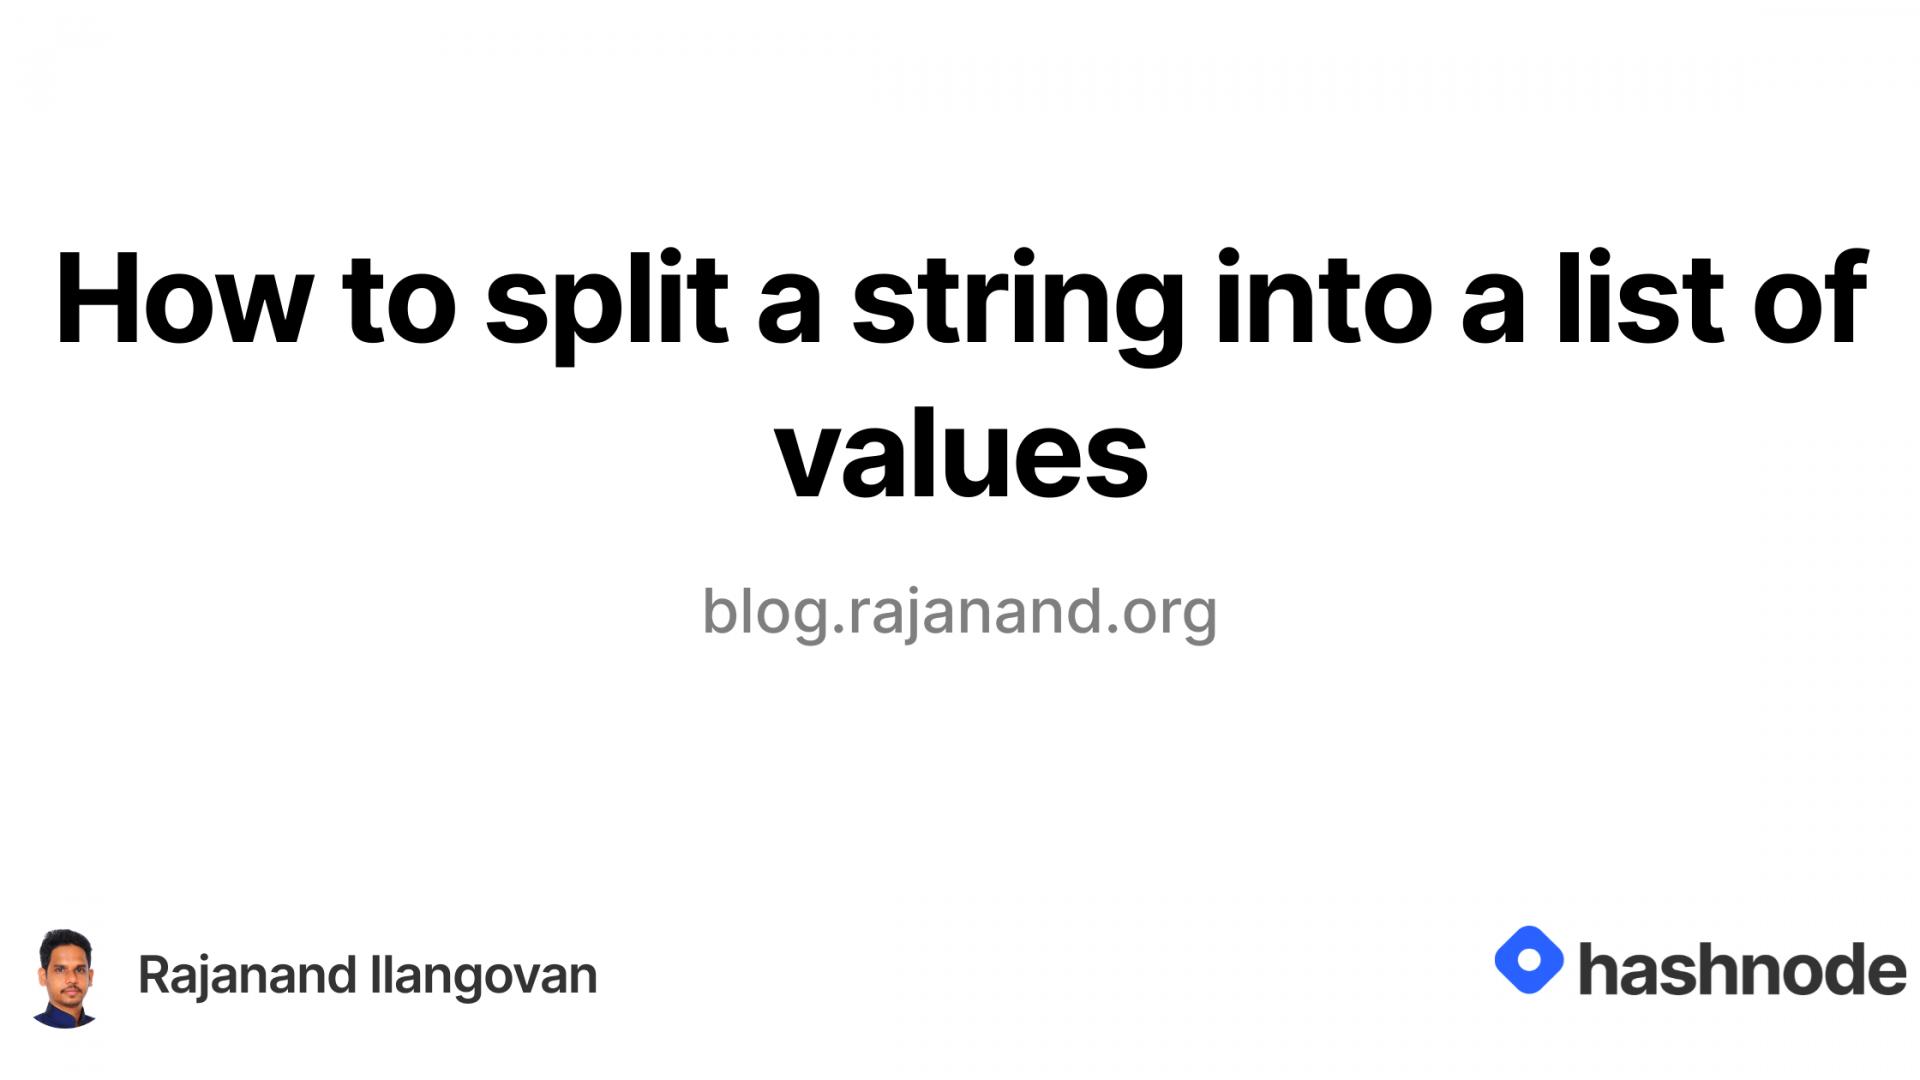 How to split a string into a list of values